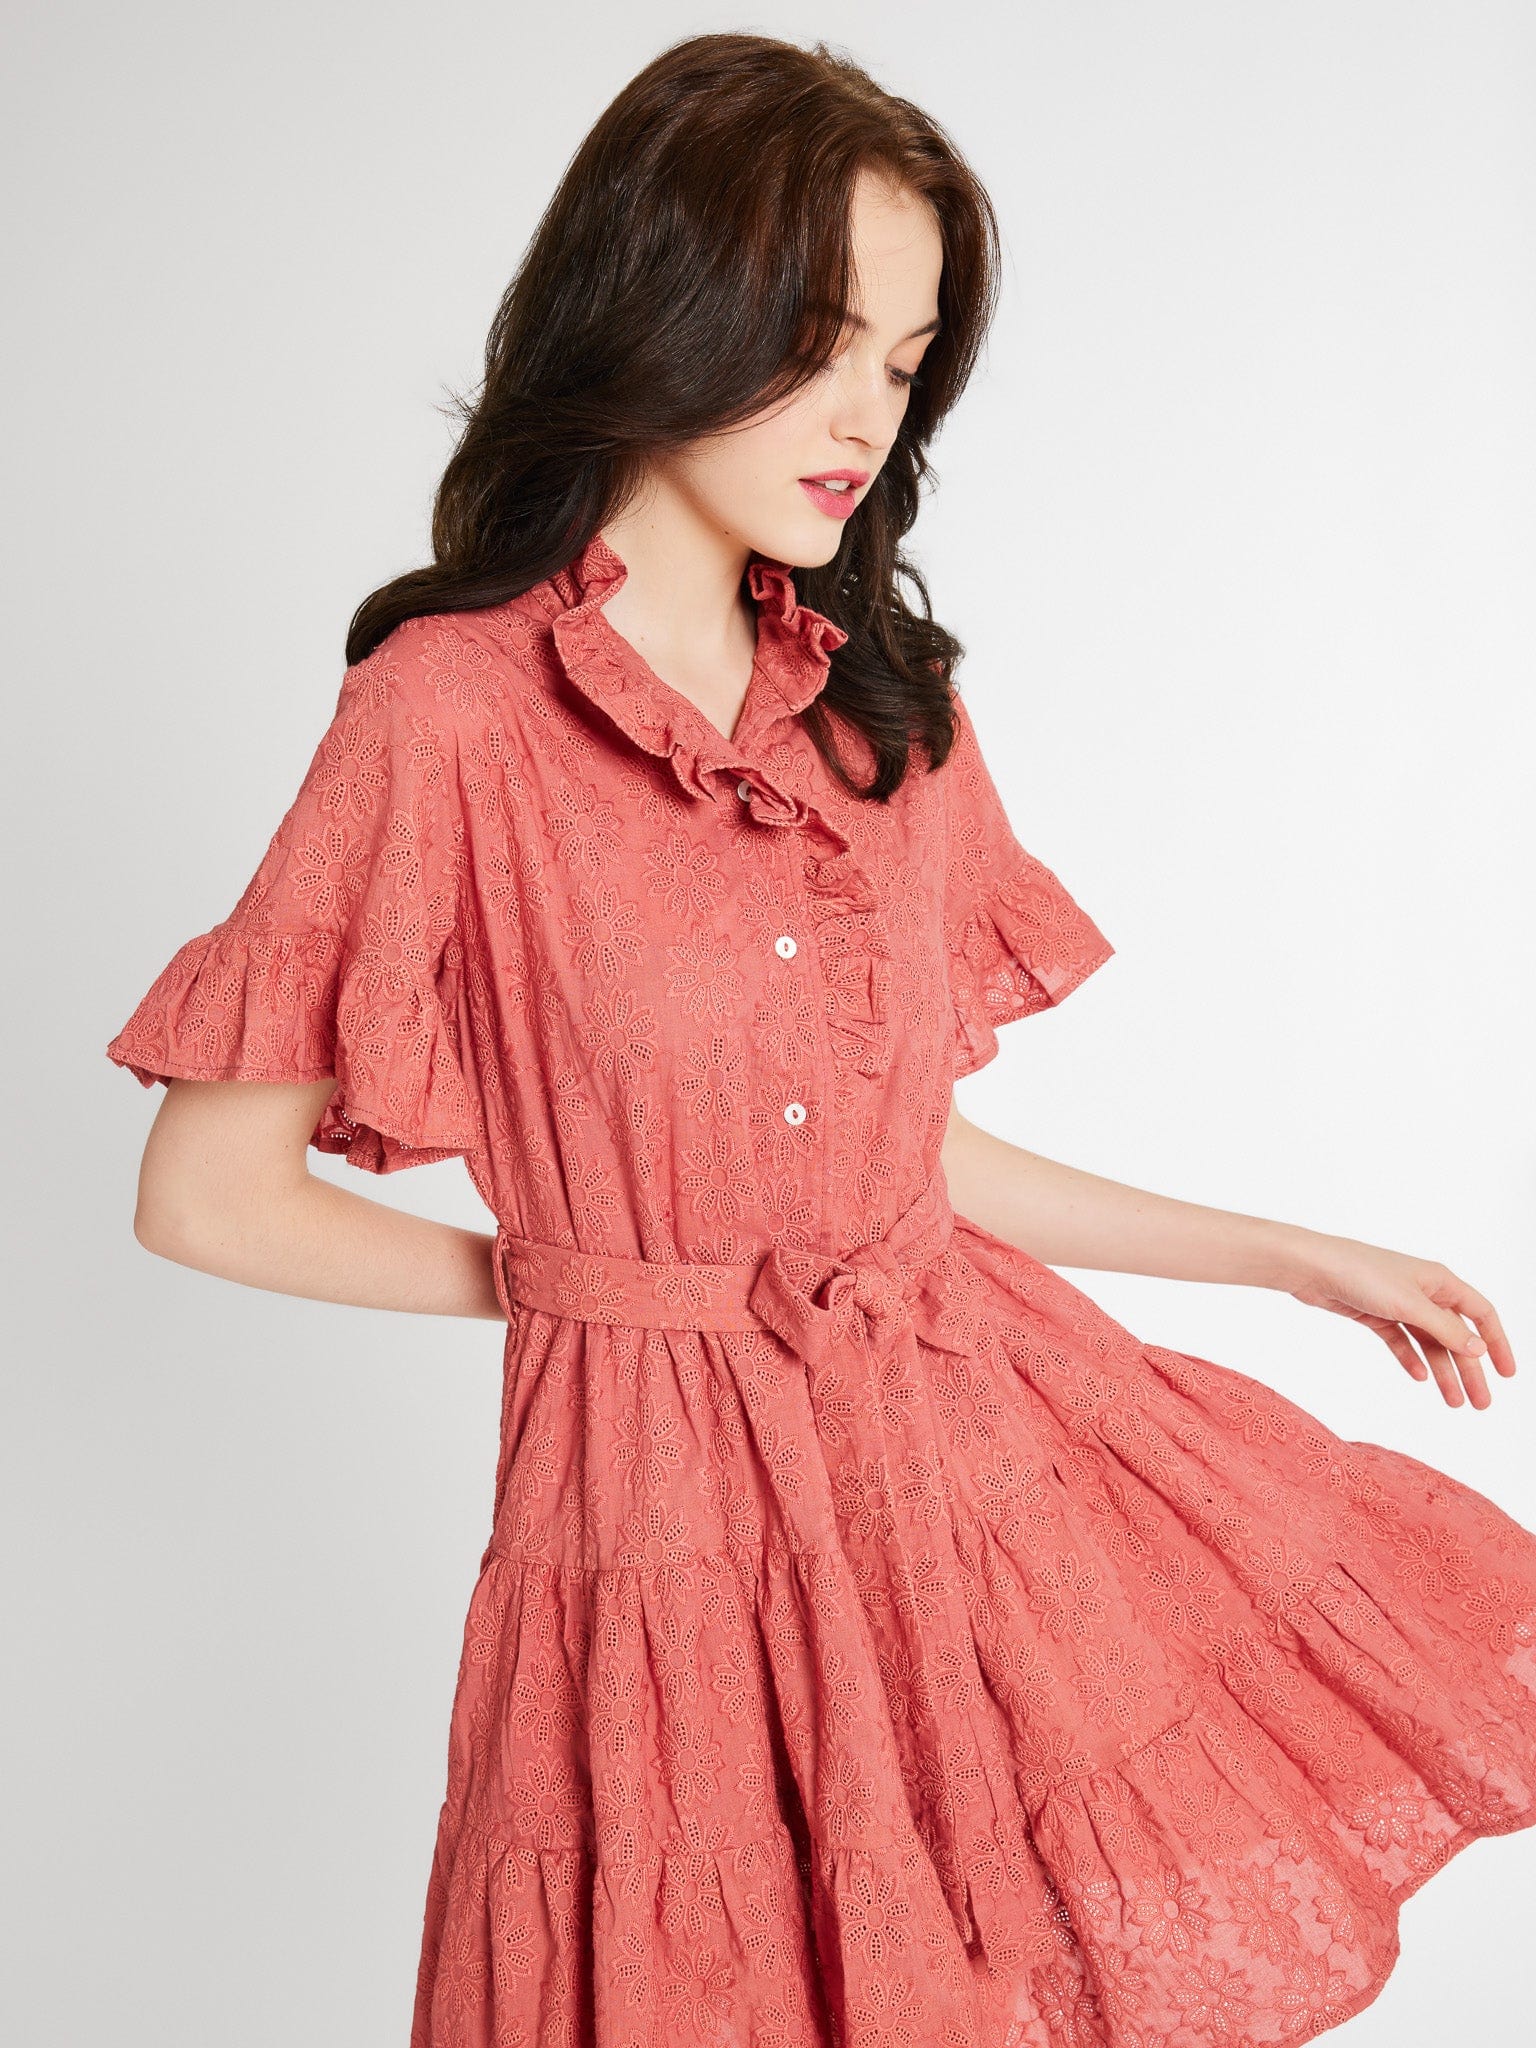 MILLE Clothing Violetta Dress in Rosewood Eyelet